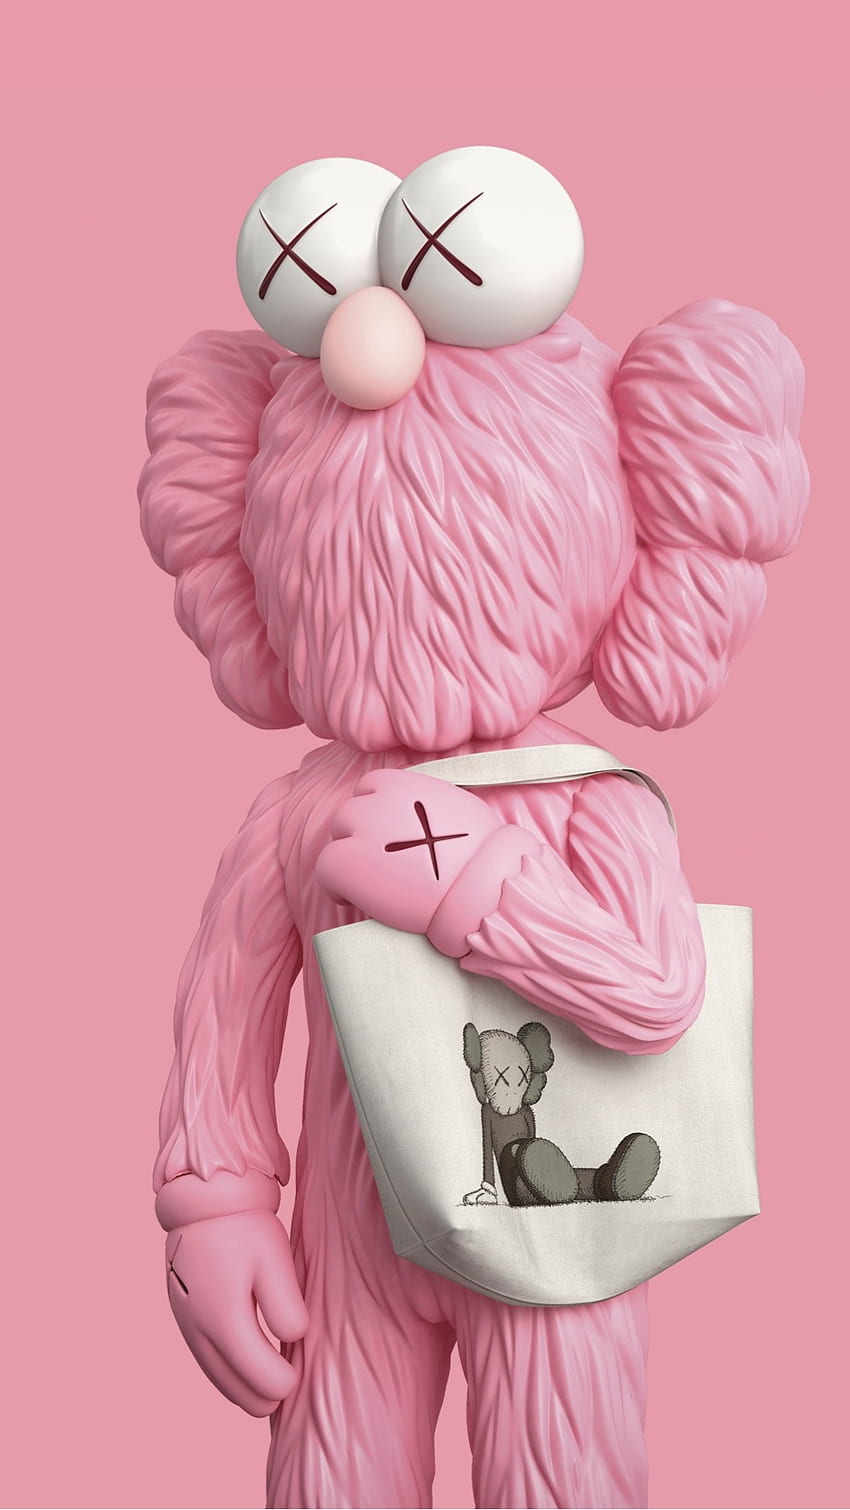 SEEING Pink With KAWS BFF  Cute flower wallpapers Kaws wallpaper  Iphone wallpaper girly